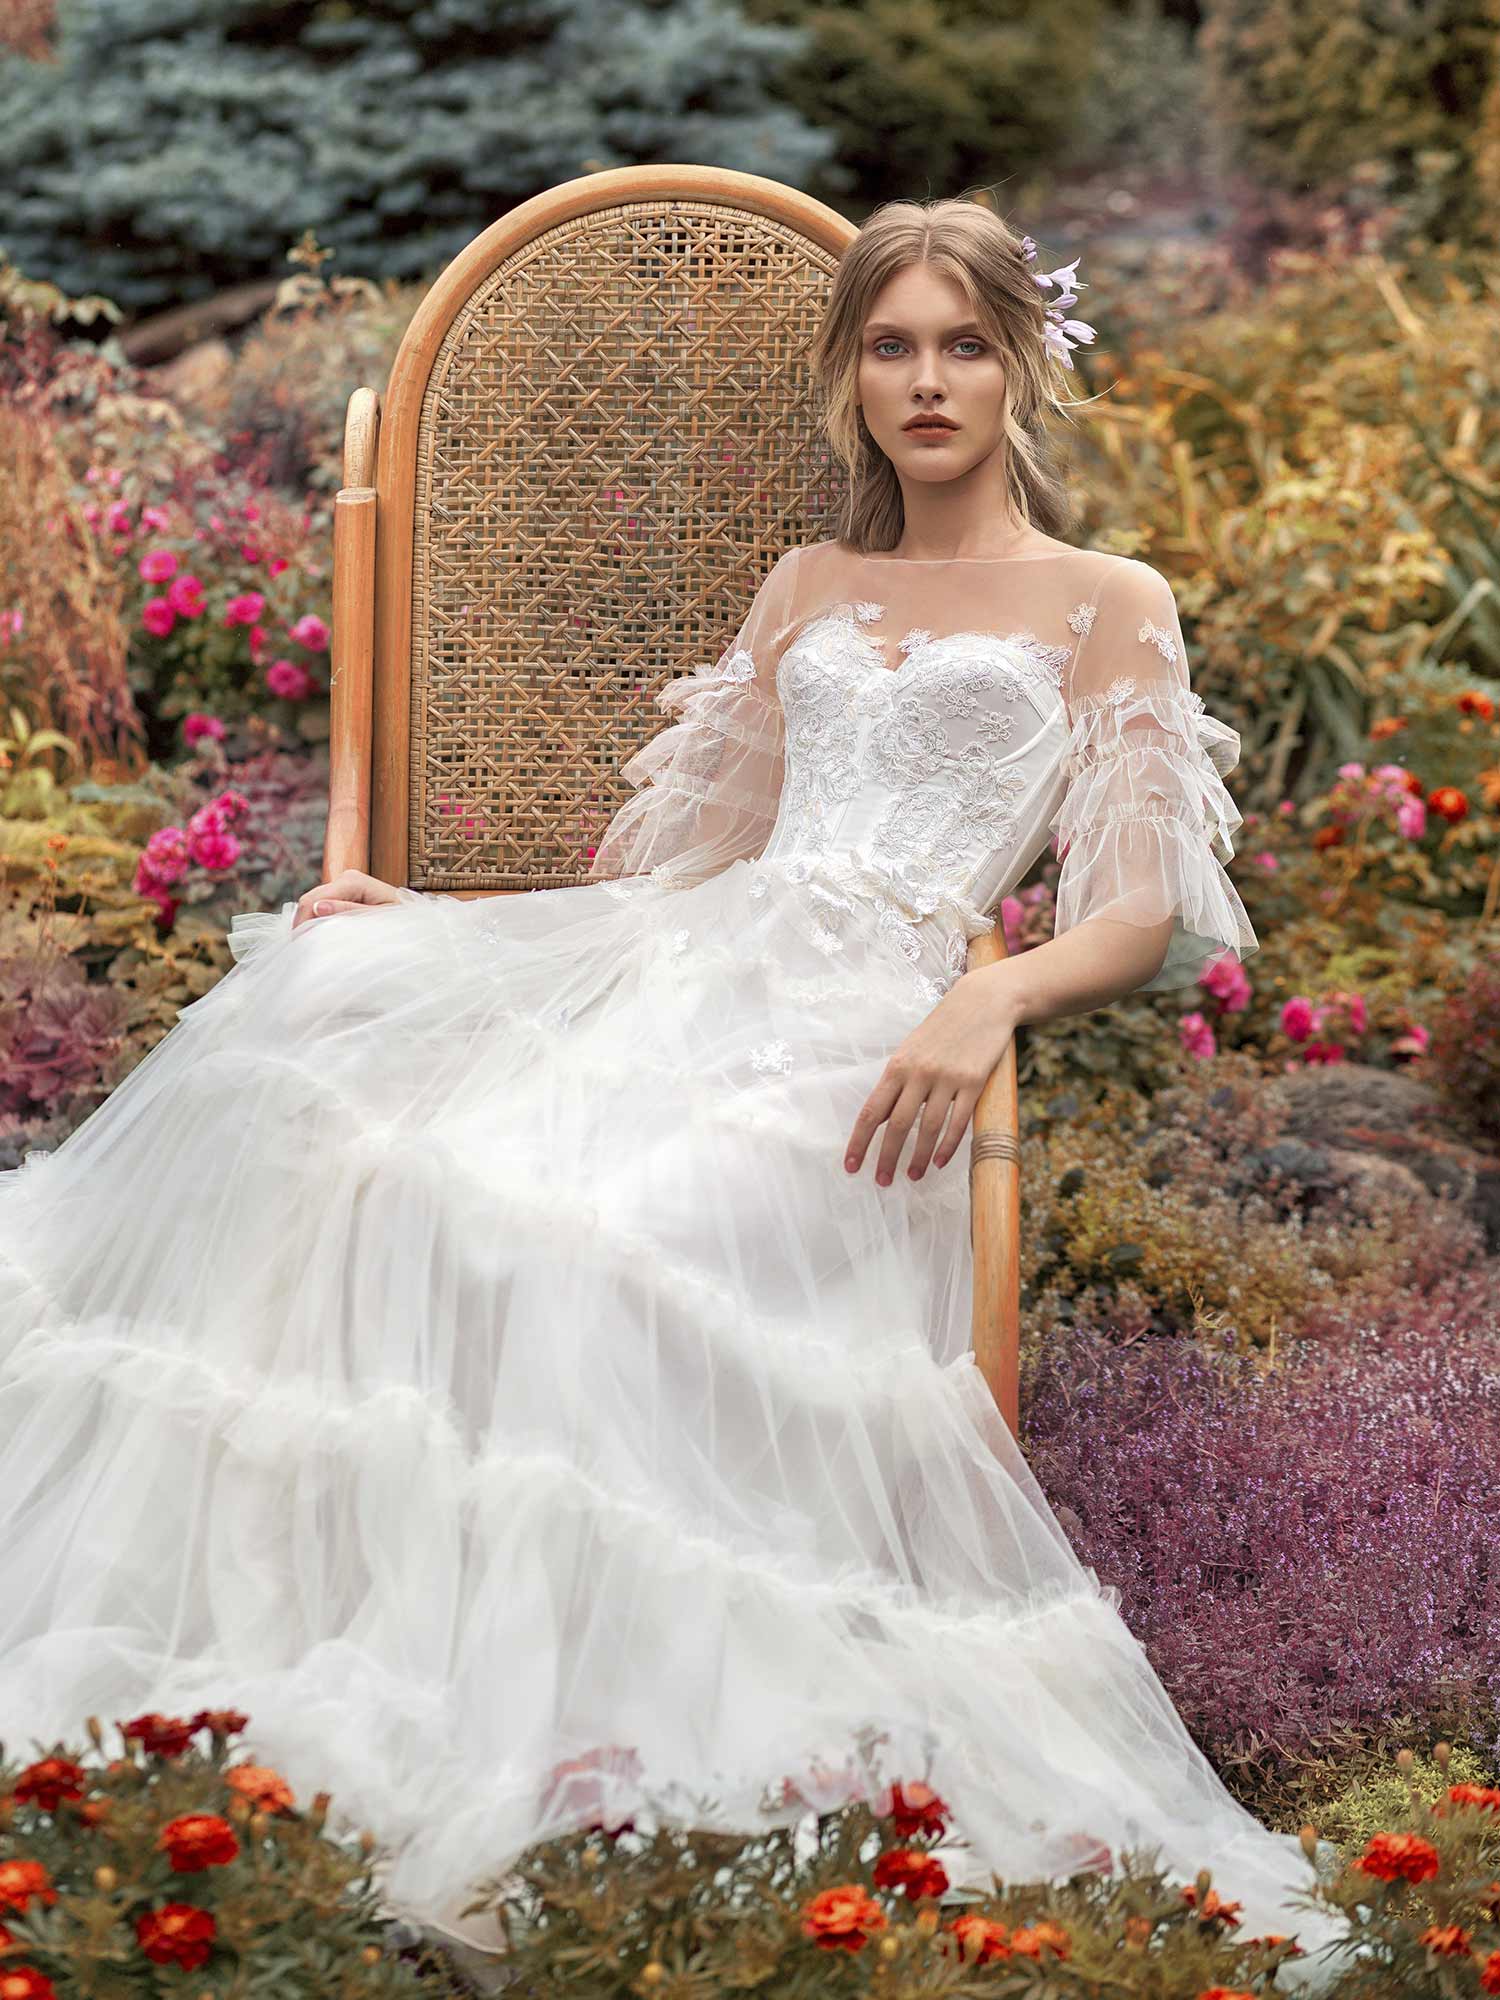 A-line wedding gown with ruffled sleeves and bustier bodice